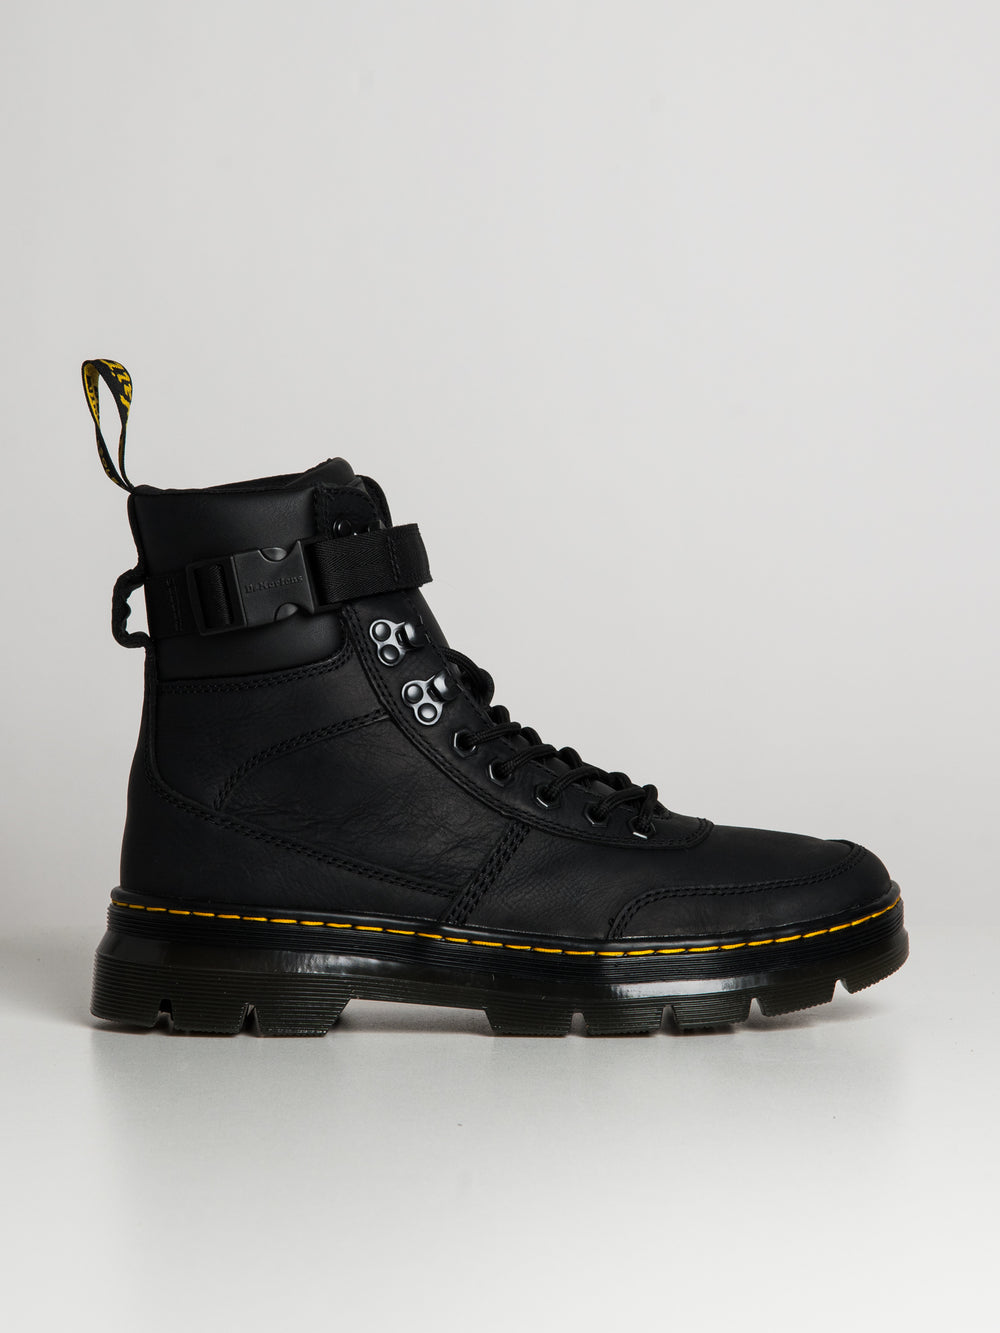 MENS DR MARTENS COMBS TECH LEATHER WYOMING BOOTS - CLEARANCE